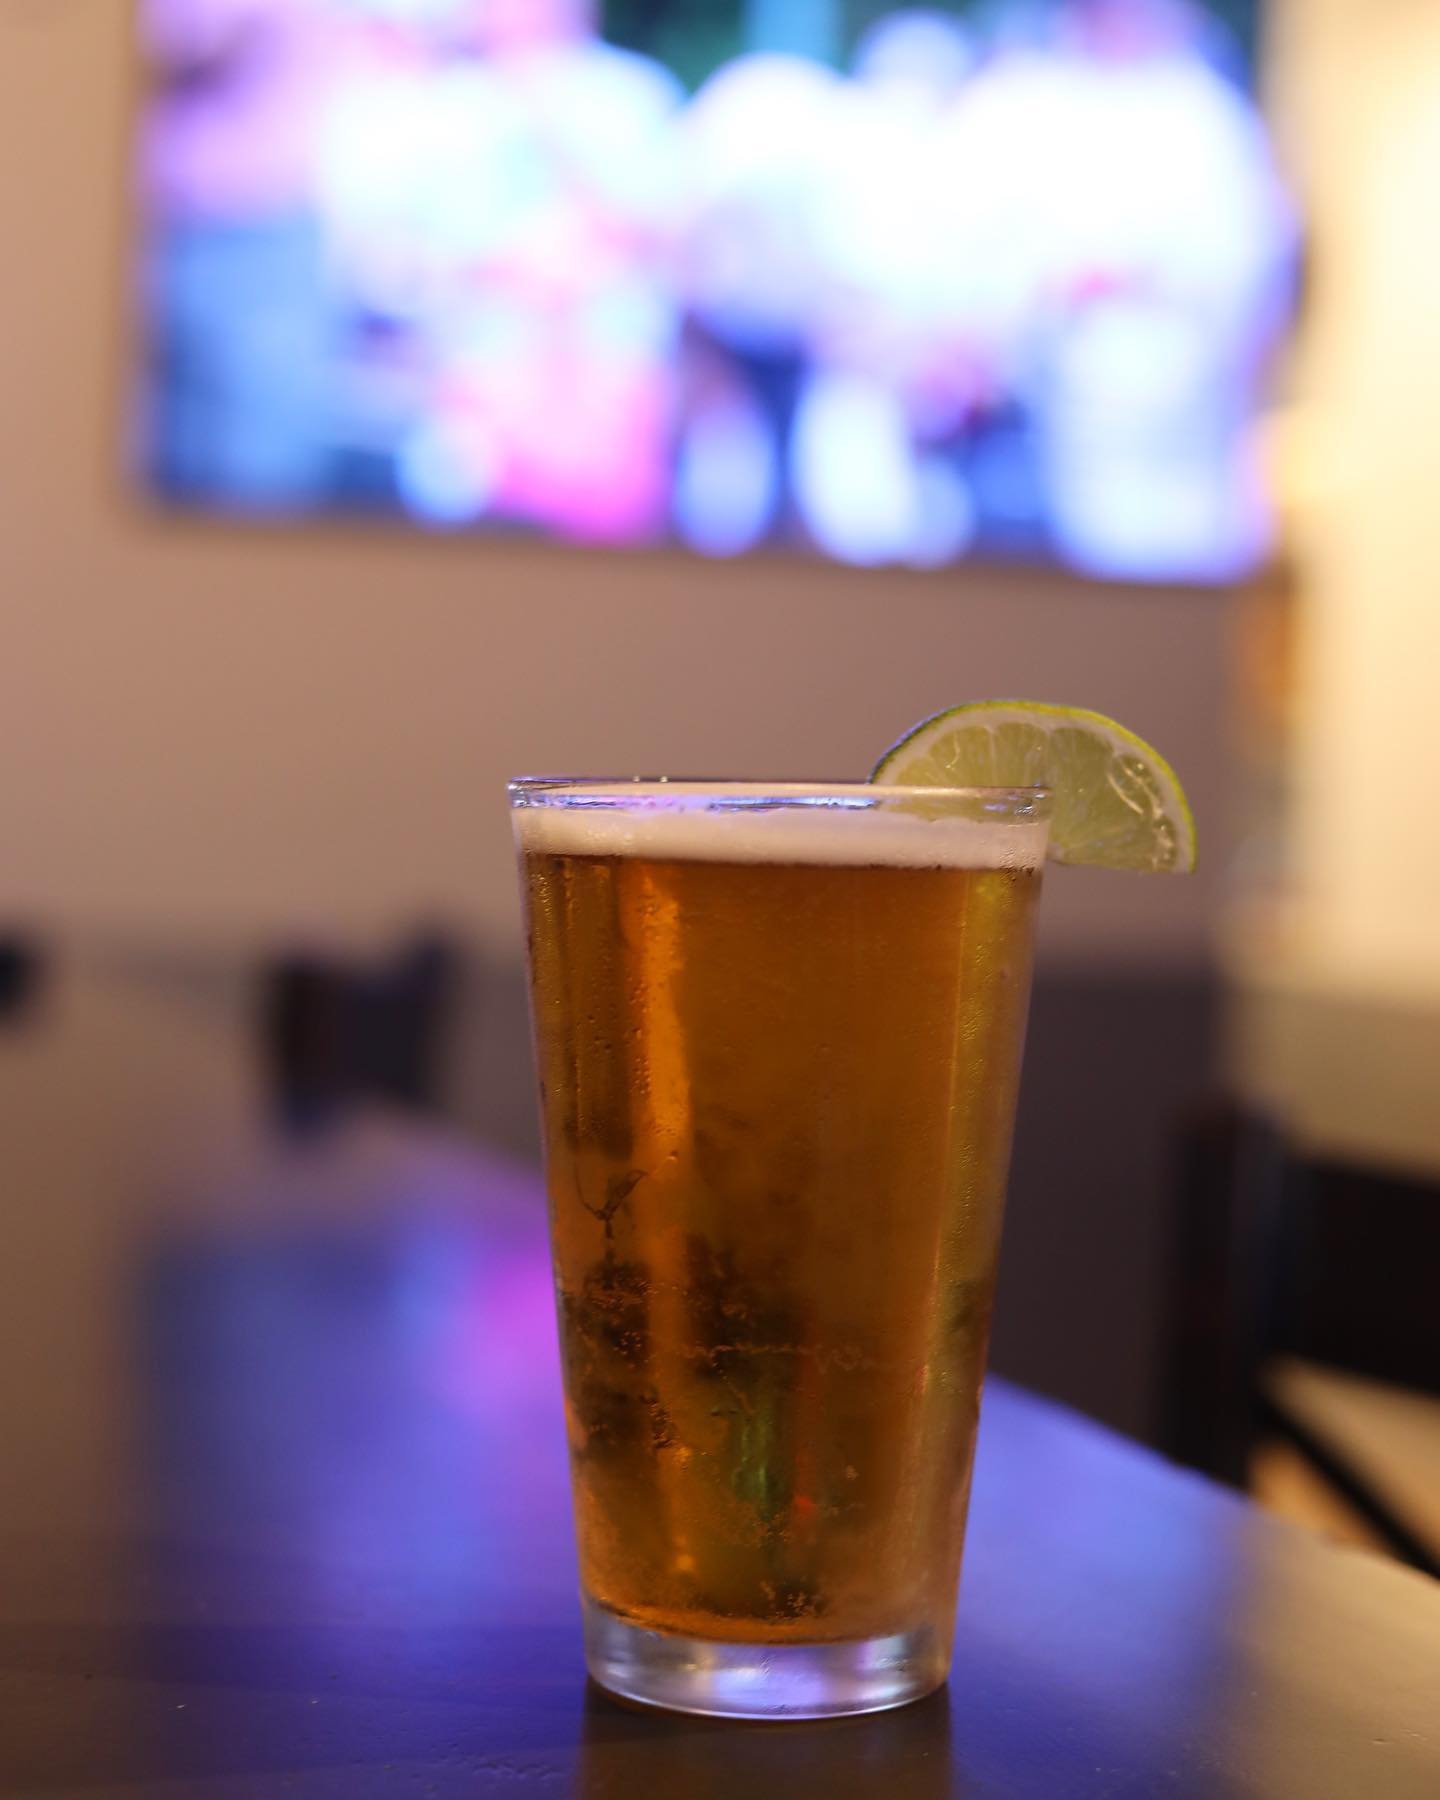 Saturday fun at Kilroy&rsquo;s OTS! 
&bull;
&bull;
&bull;
Cold beer always 🤝

#quincy #bar #sportsbar #games #sports #beer #modelo #yum #cocktails #southshorema #goodvibes #livemusic #weekend #saturday #hangwithus #yesss